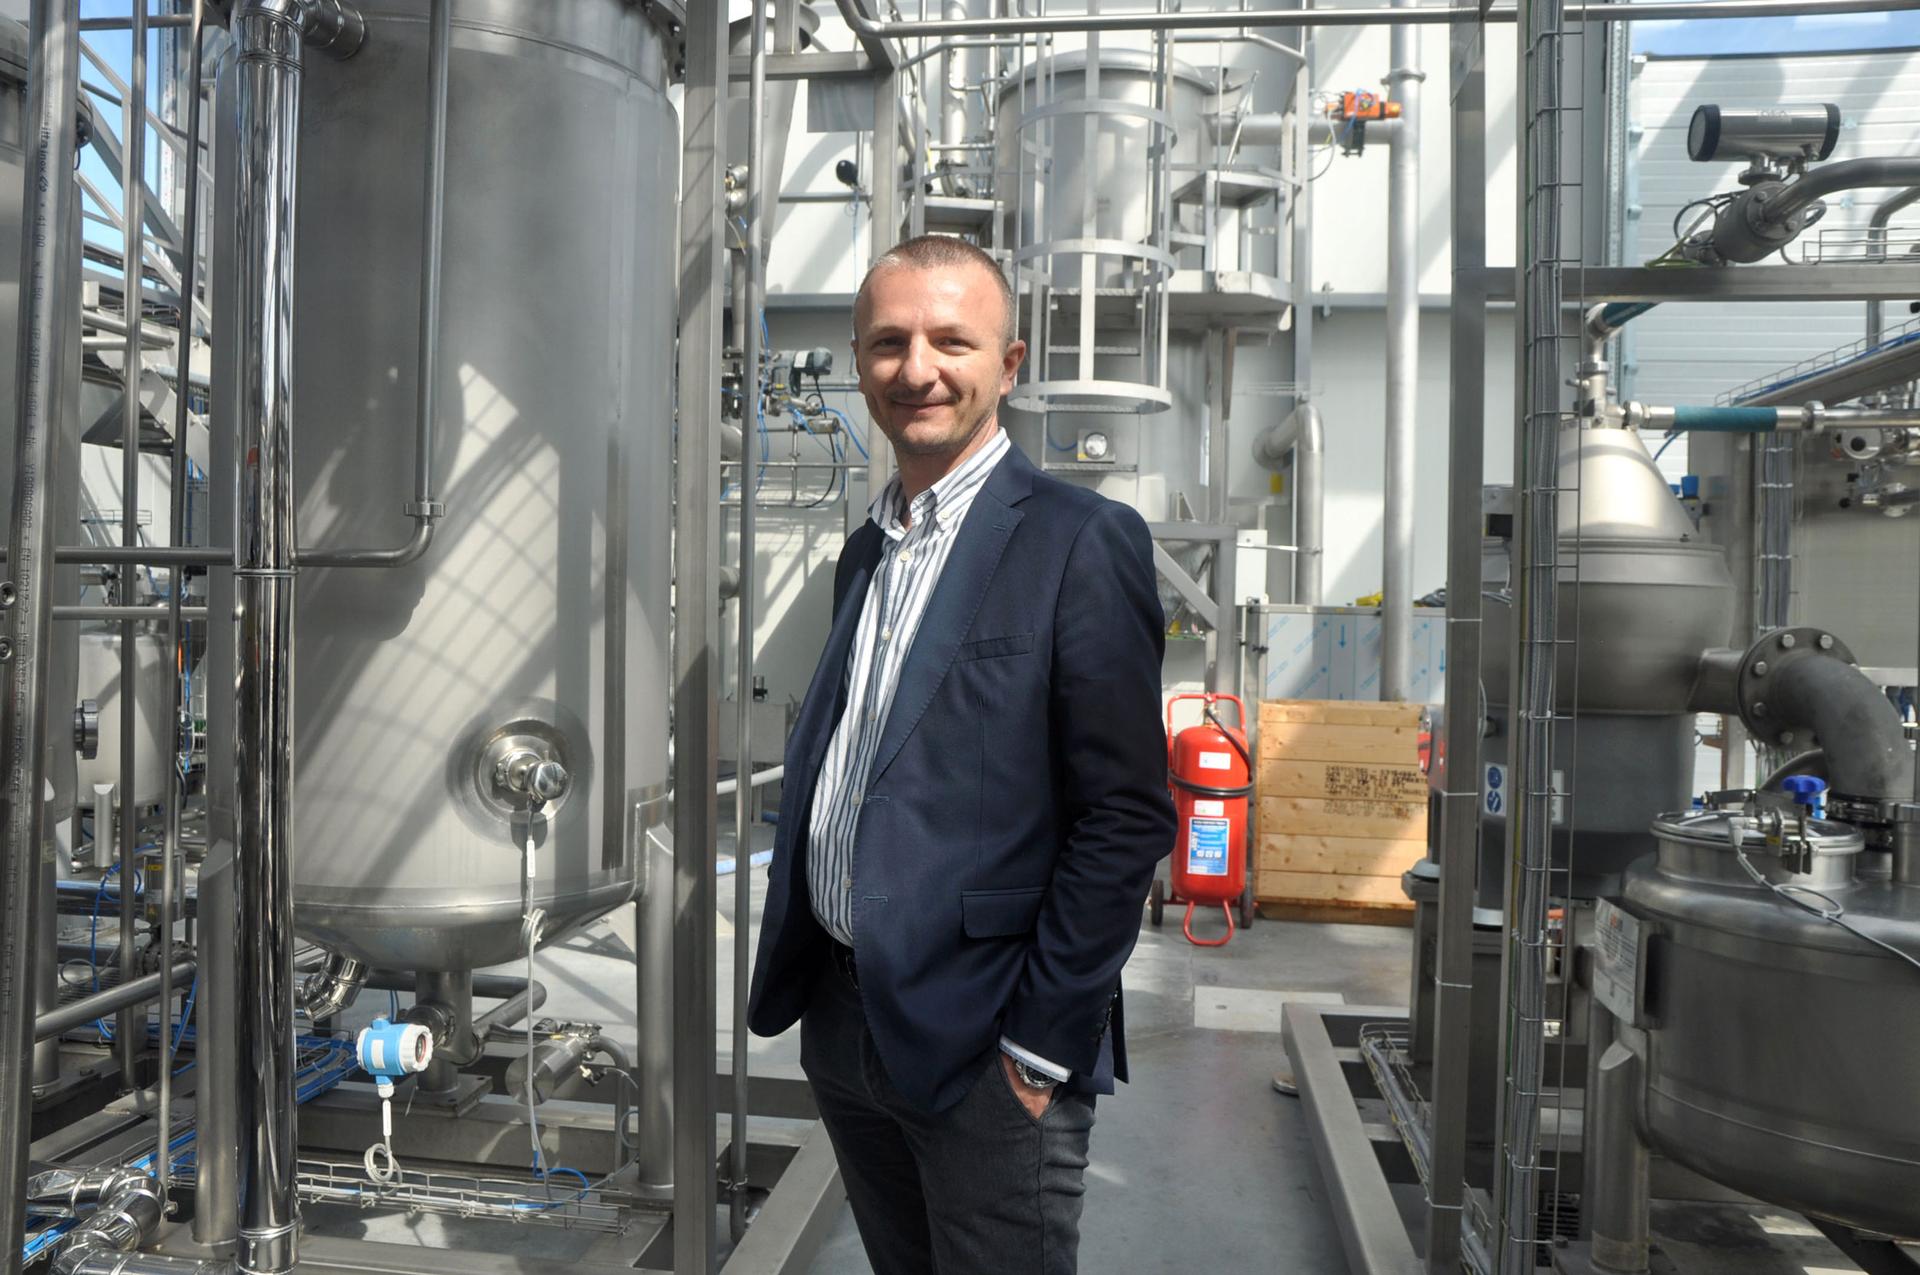 Berat Haznedaroğlu, director of the Istanbul Microalgae Biotechnologies Research and Development Center, stands amid equipment used to extract lipids from microalgae and convert them into fatty acids. After testing for quality, the oil is shipped off to a